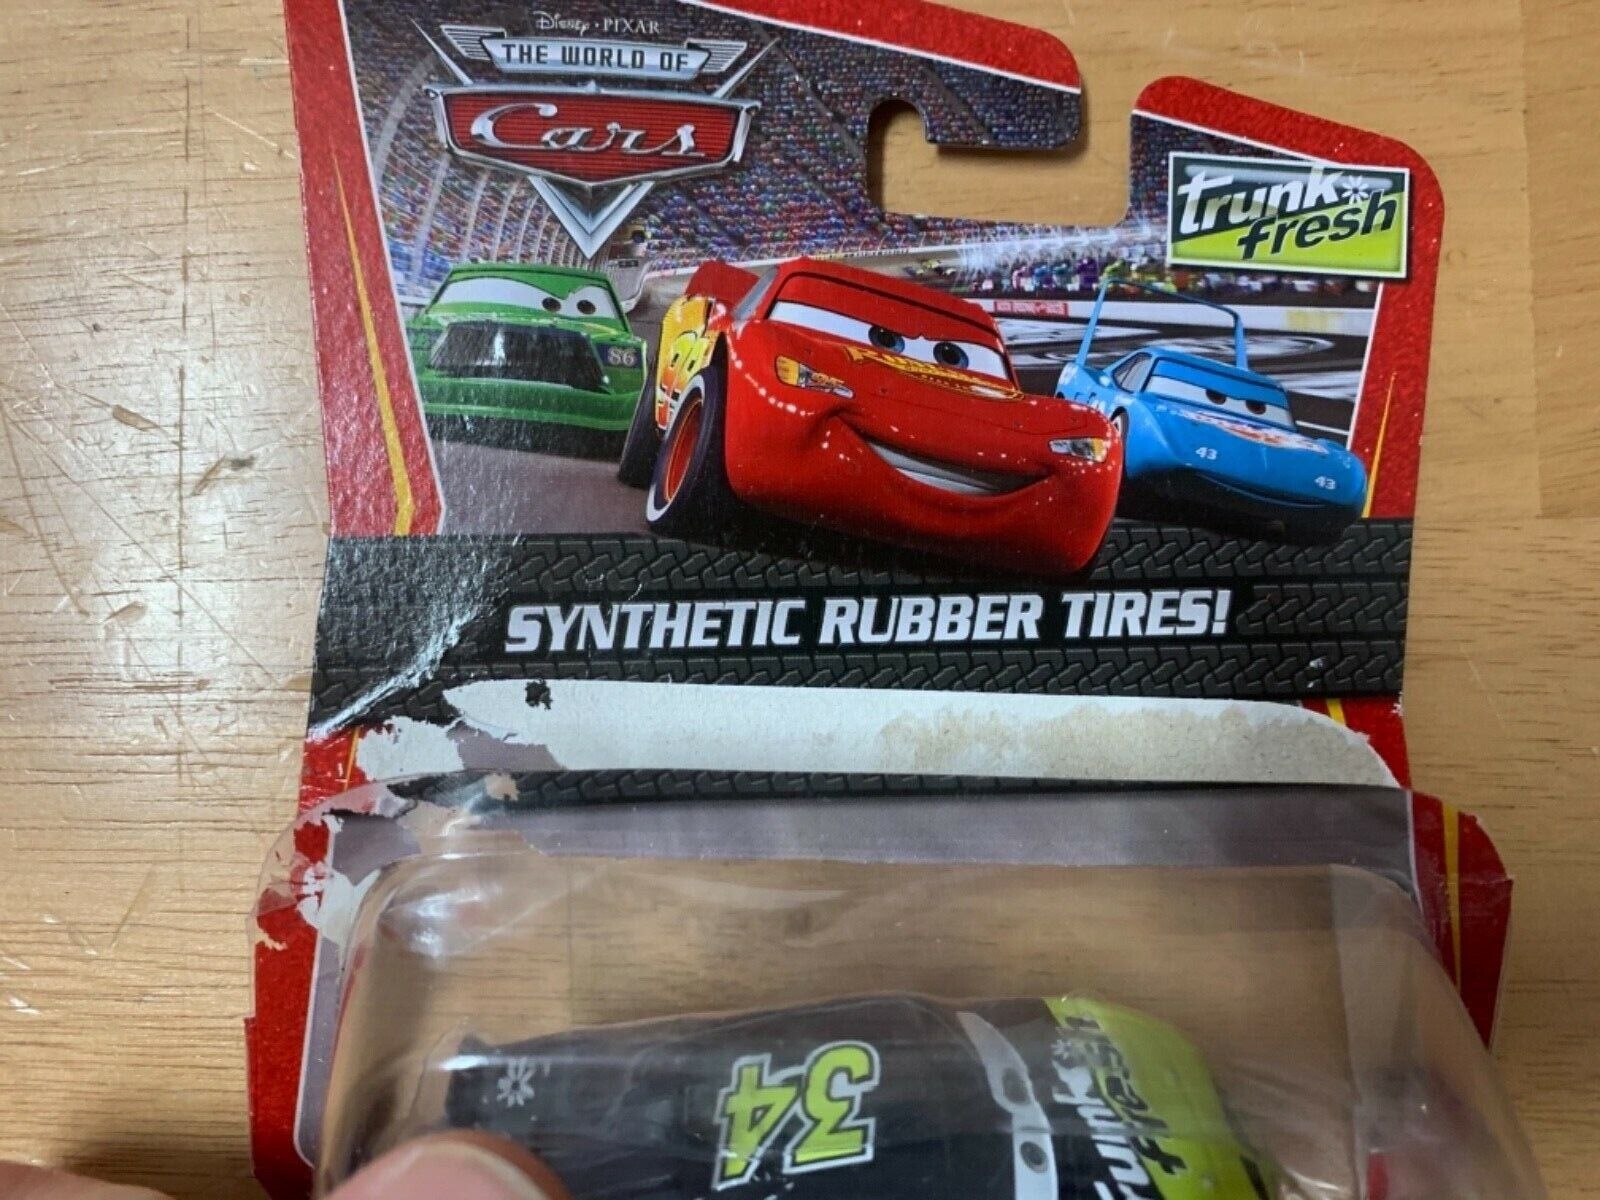 Disney Pixar Cars Synthetic Rubber Tires Opened Trunk Fresh No. 34